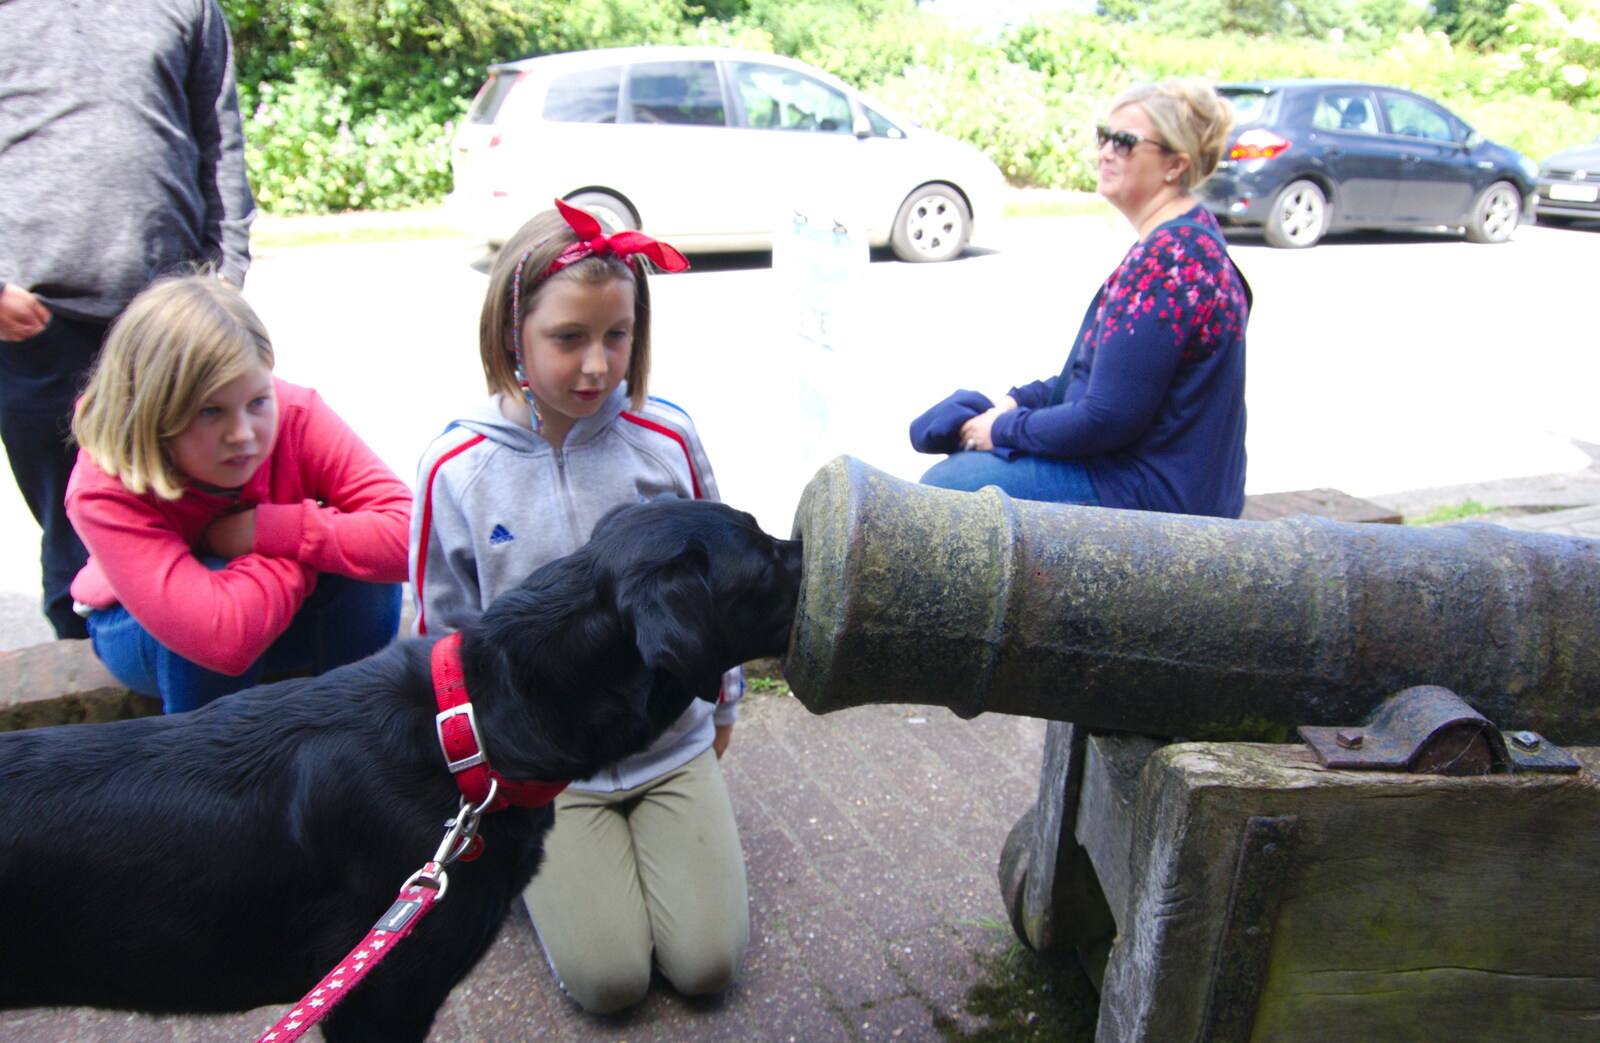 Tilly Dog has her nose stuffed into a cannon from Cliff House Camping, Dunwich, Suffolk - 15th June 2019